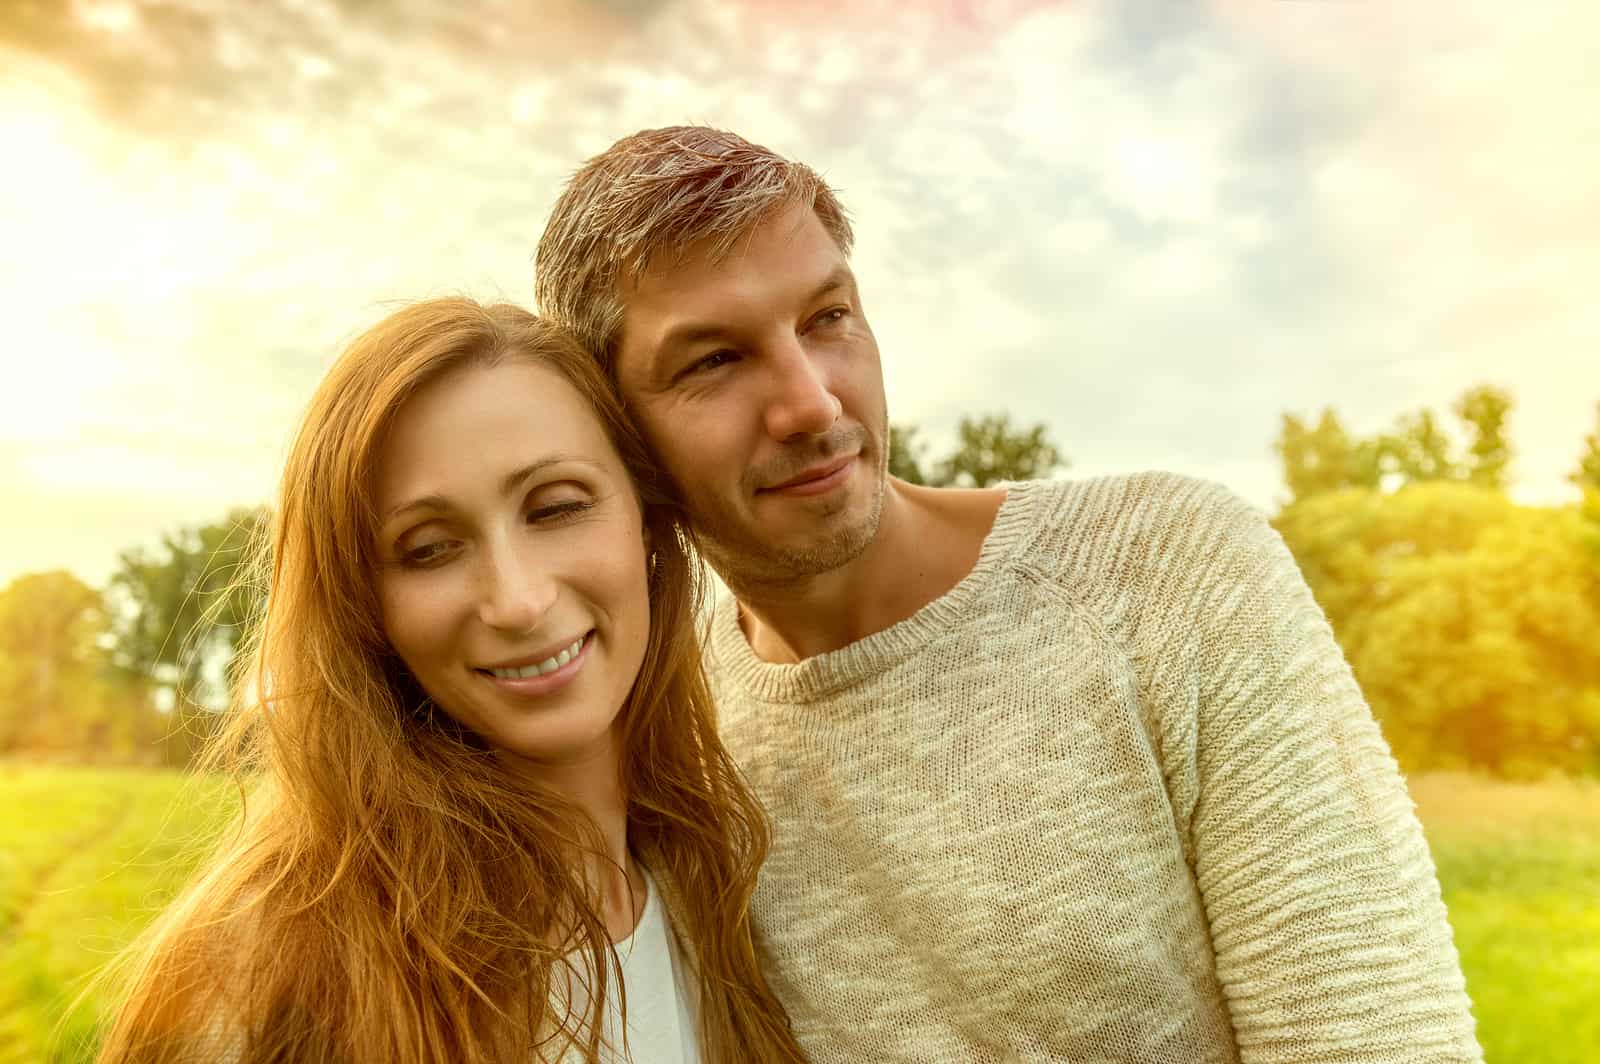 Can Age Differences Affect a Relationship?